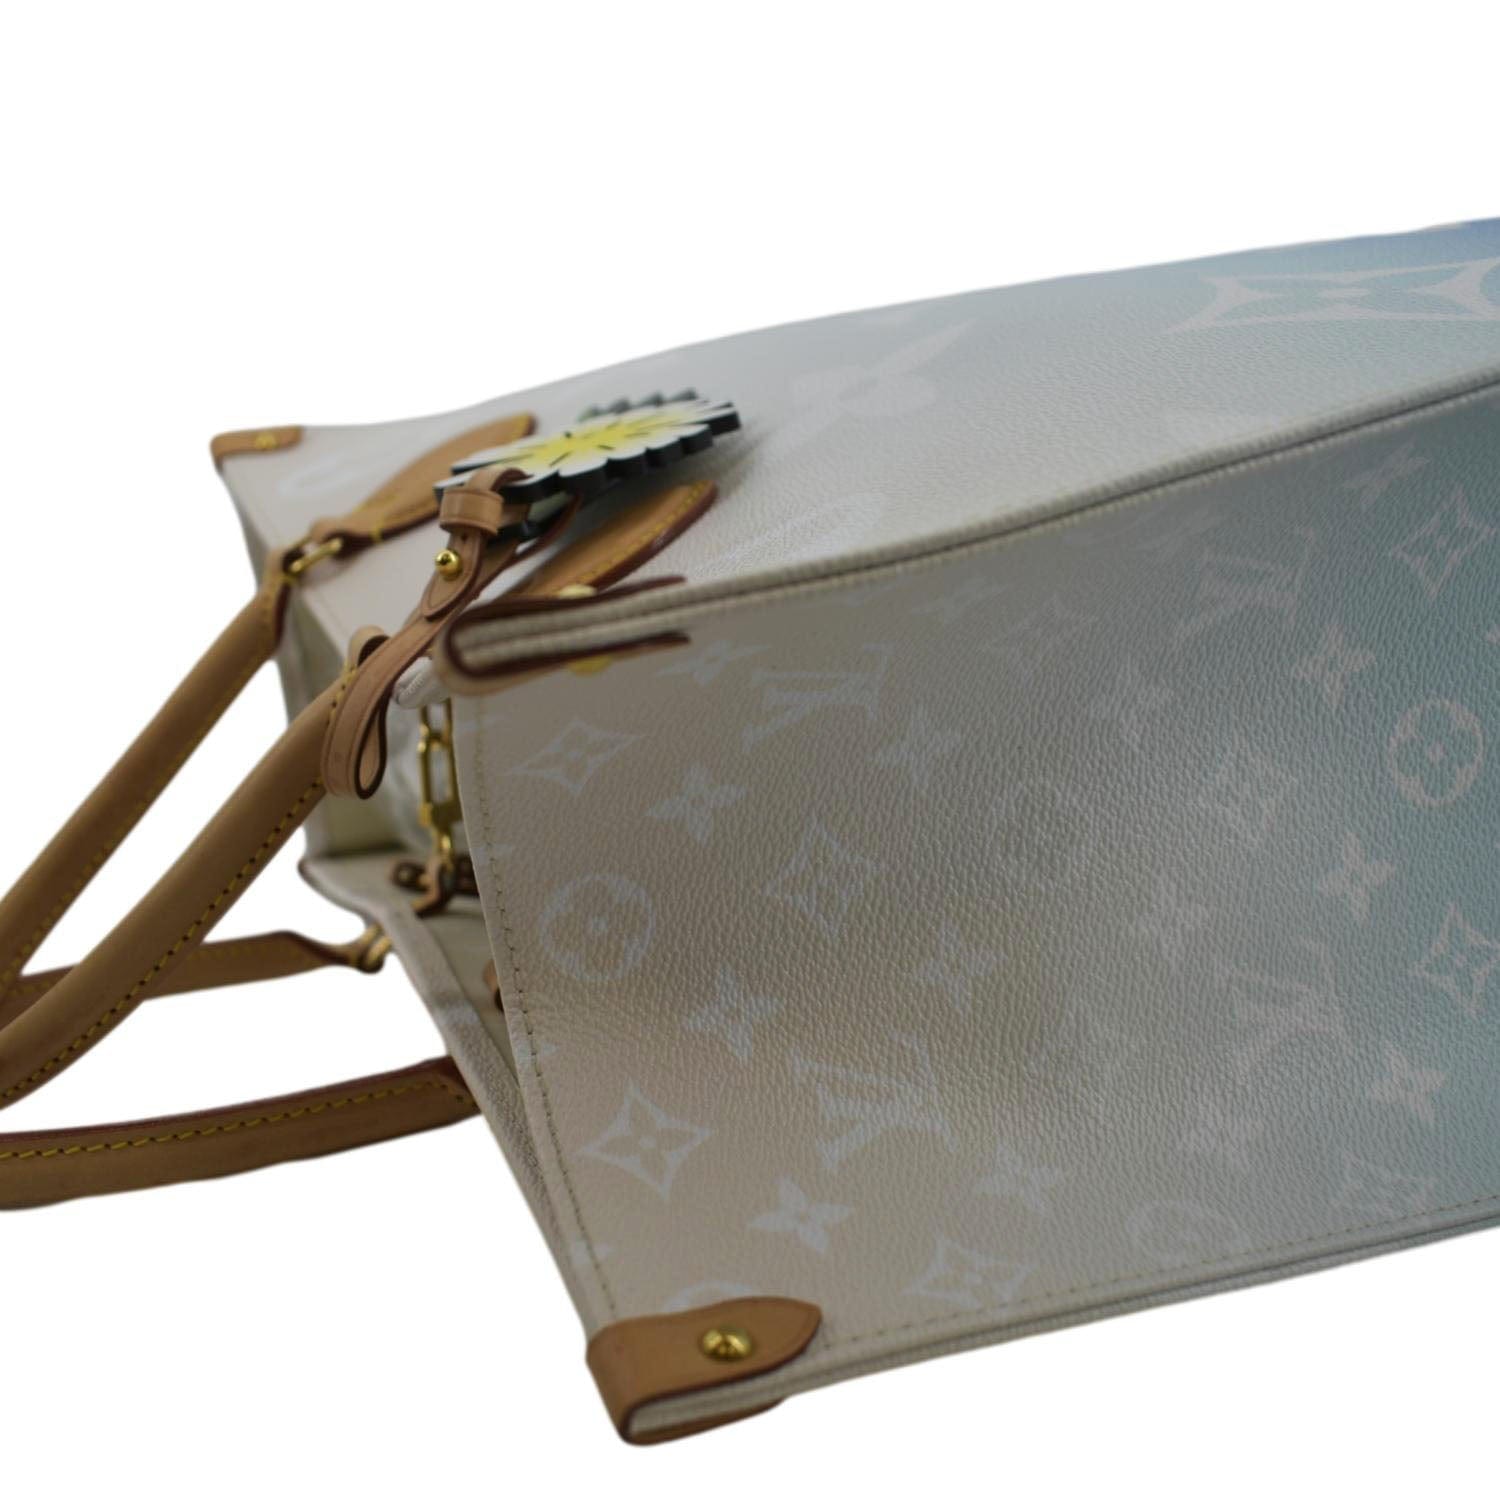 Louis+Vuitton+OnTheGo+Blue+Interior+Tote+GM+Multicolor+Canvas for